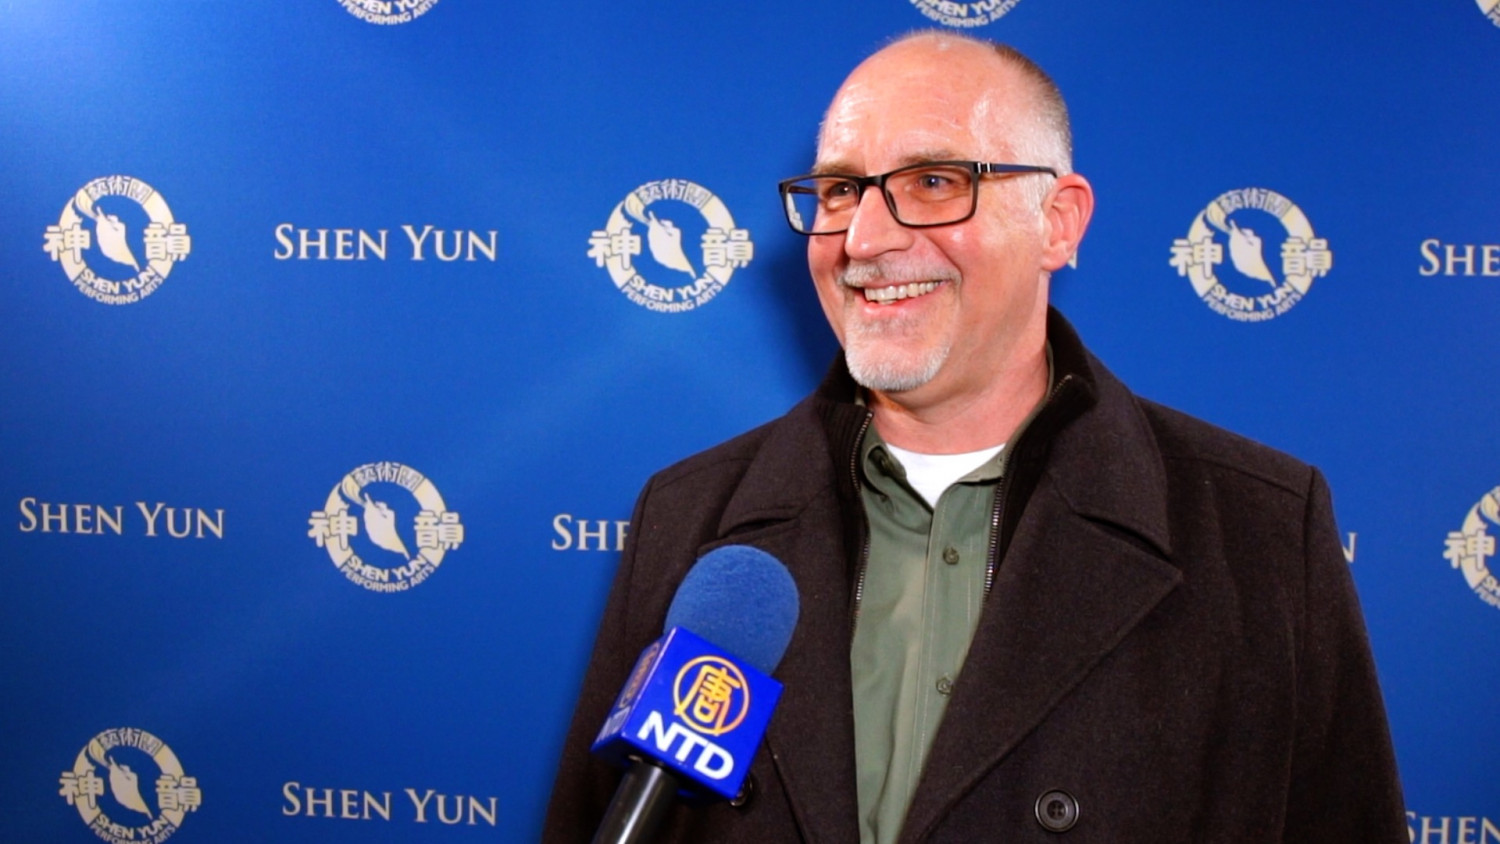 Director and Editor-in-Chief Felt Grateful for Shen Yun’s Freedom of Expression